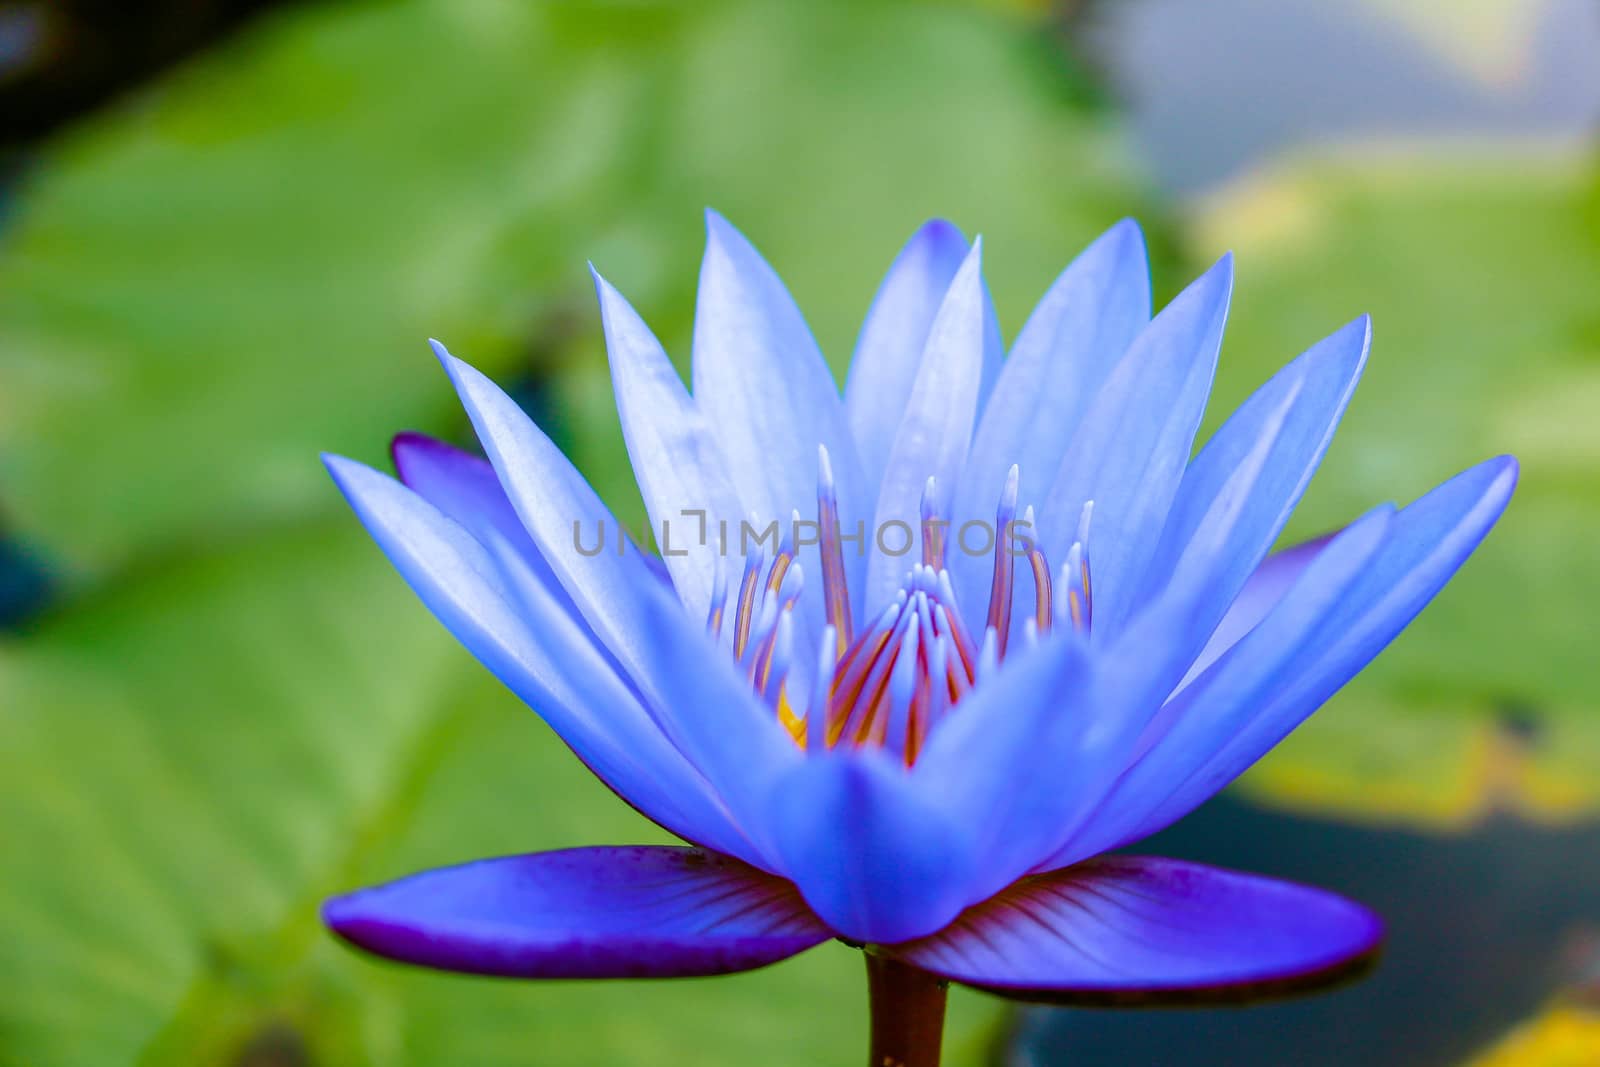 A violet water lily flower with green leaves behing. by e22xua